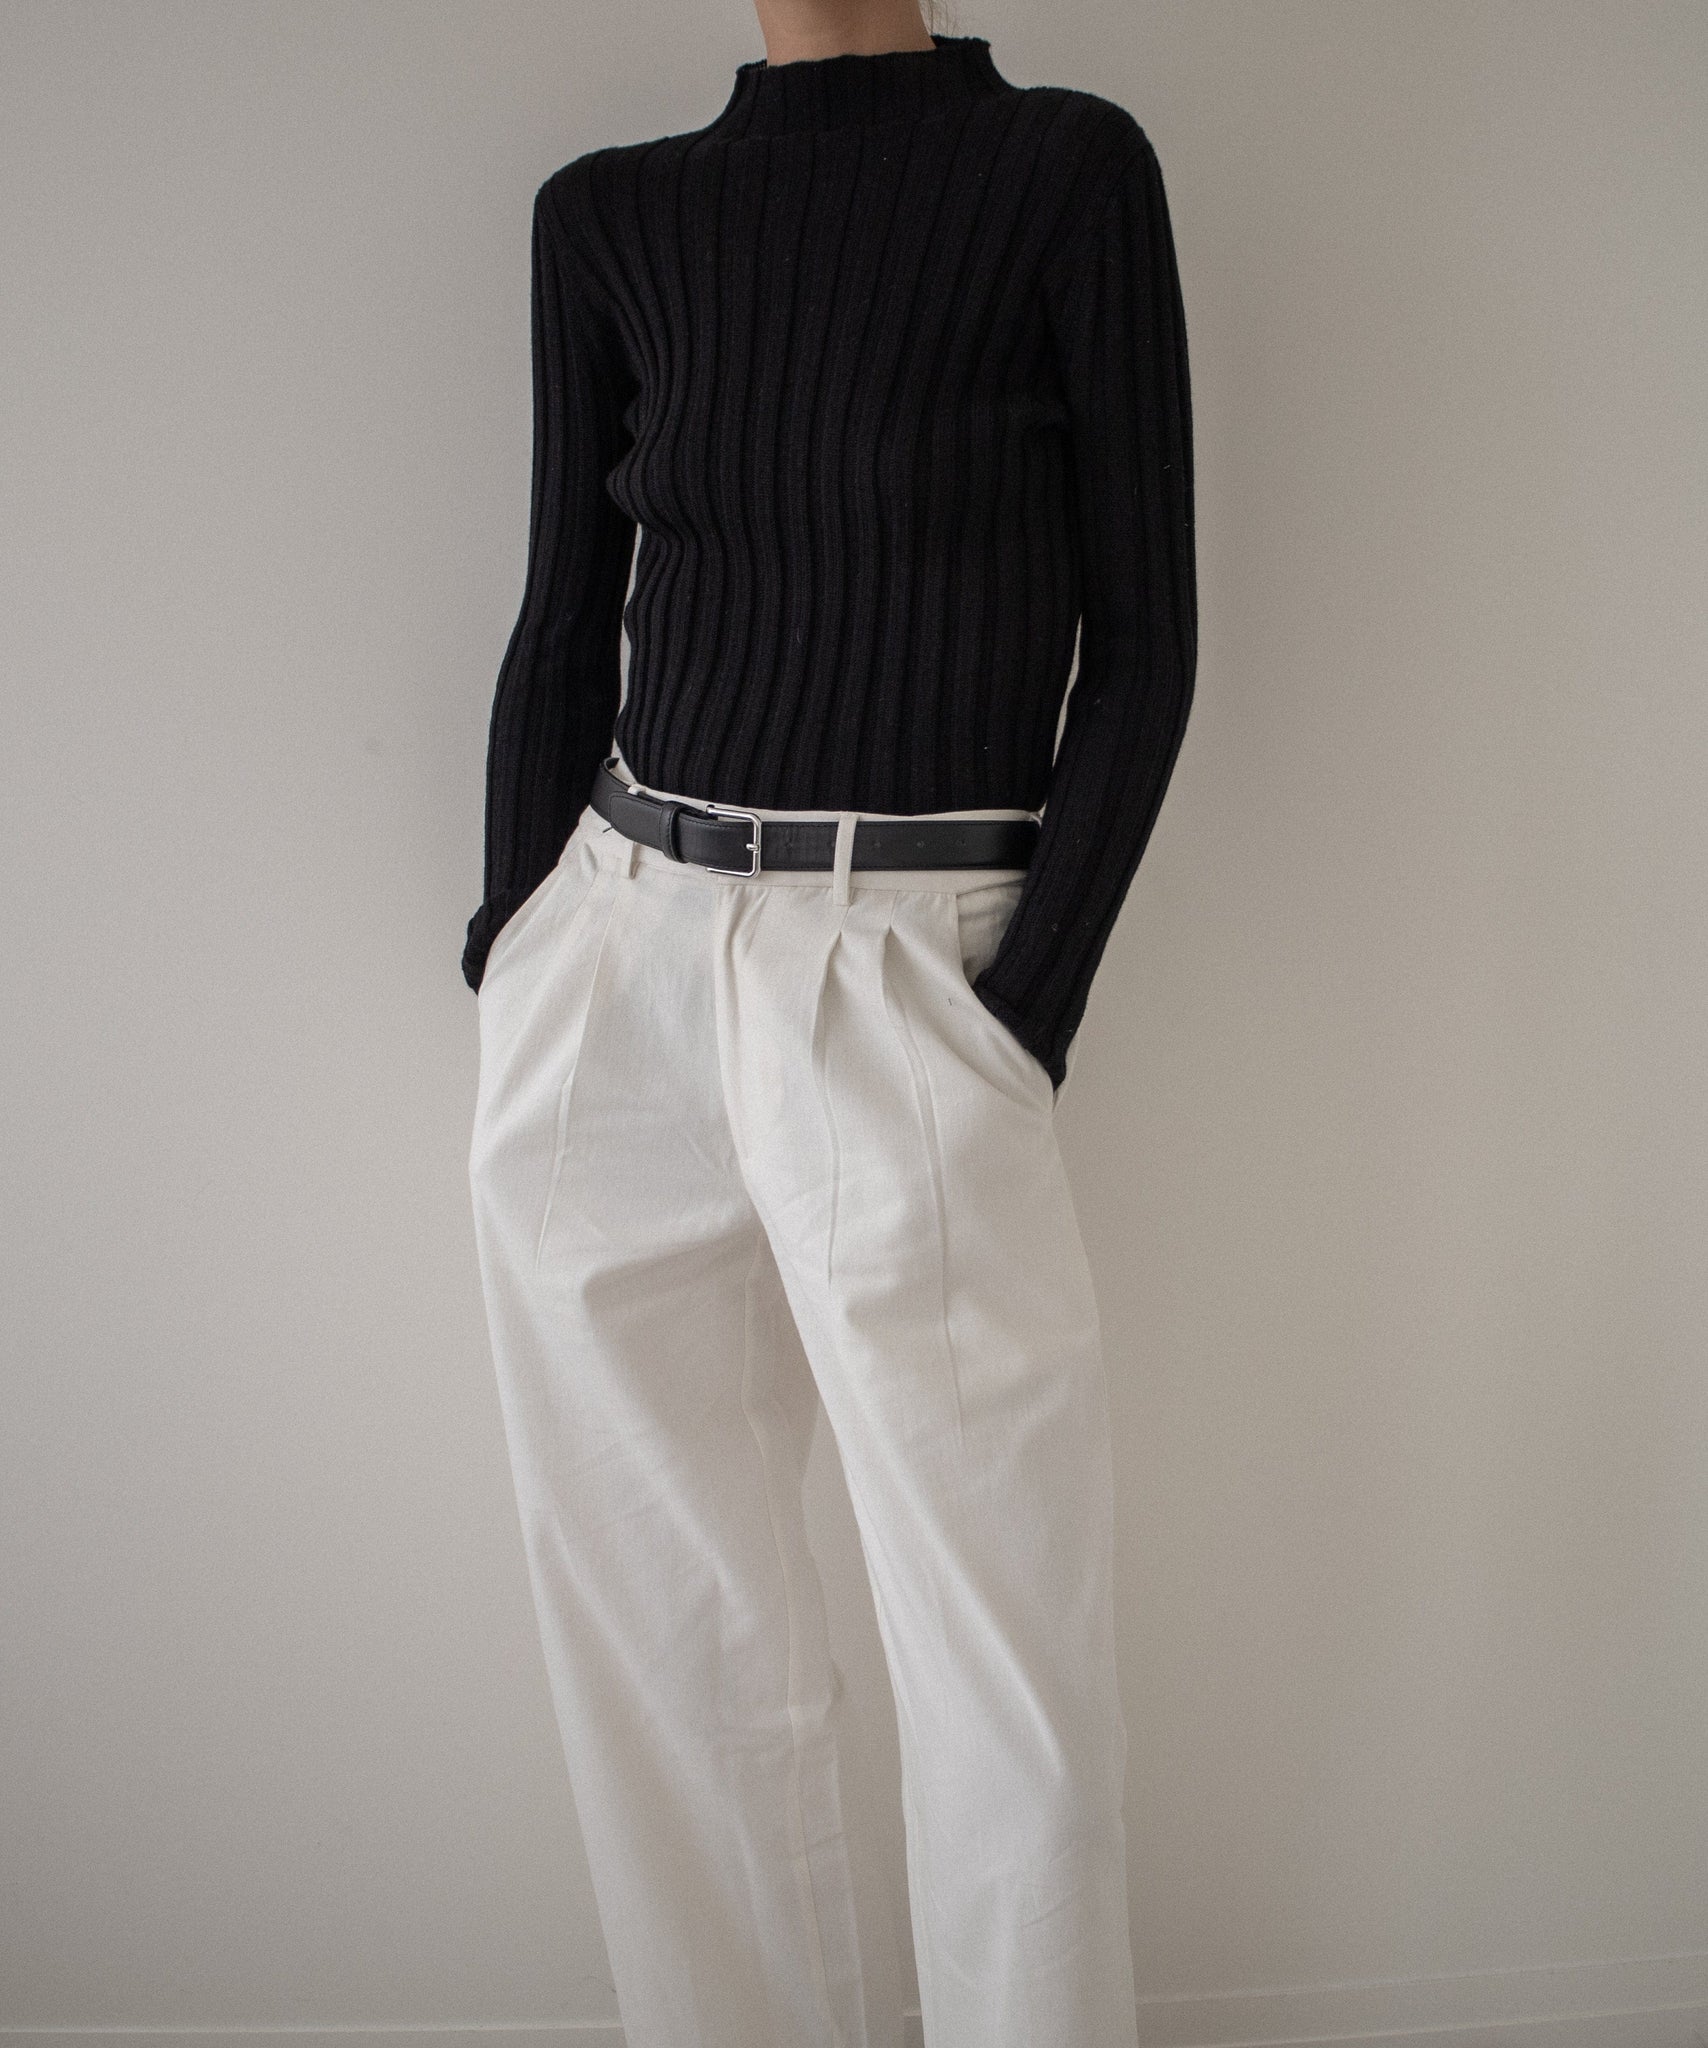 A woman wearing a black sweater and Alfred Trouser - Ivory pants.